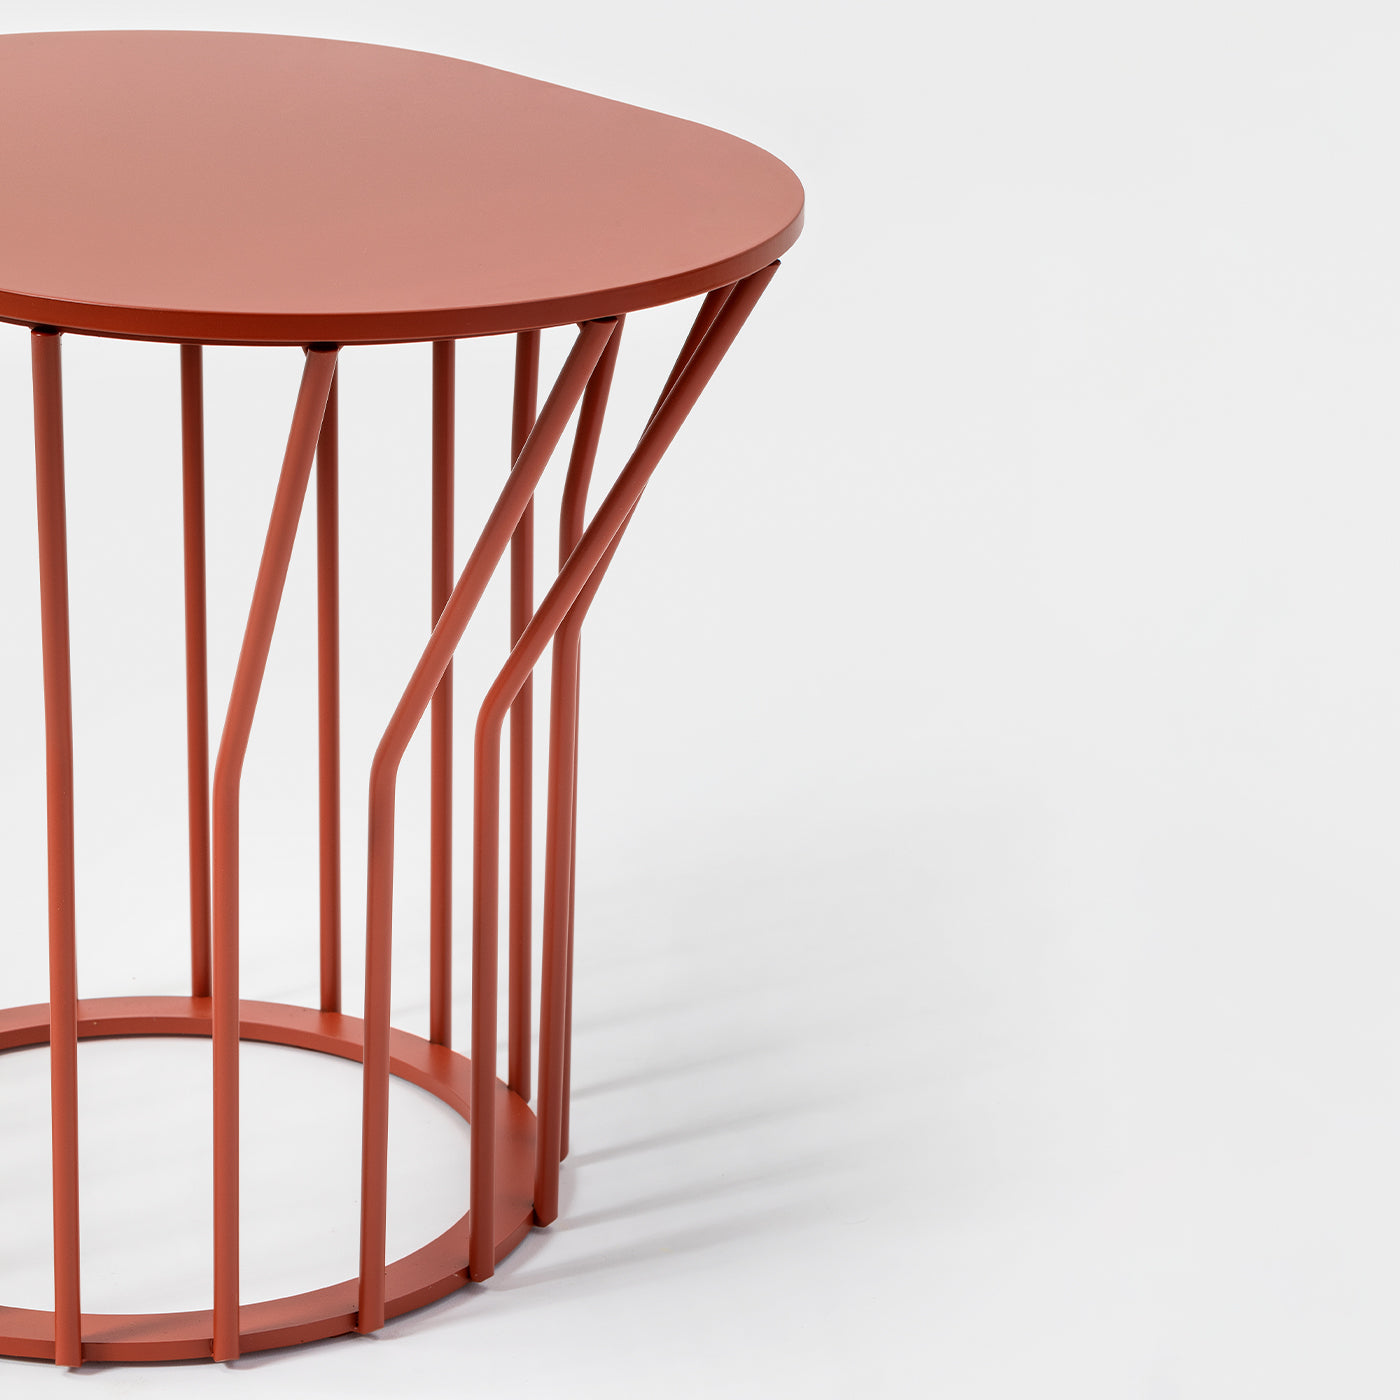 0132 Jump Small Round Red Coffee Table by Studio Gabbertas - Alternative view 1